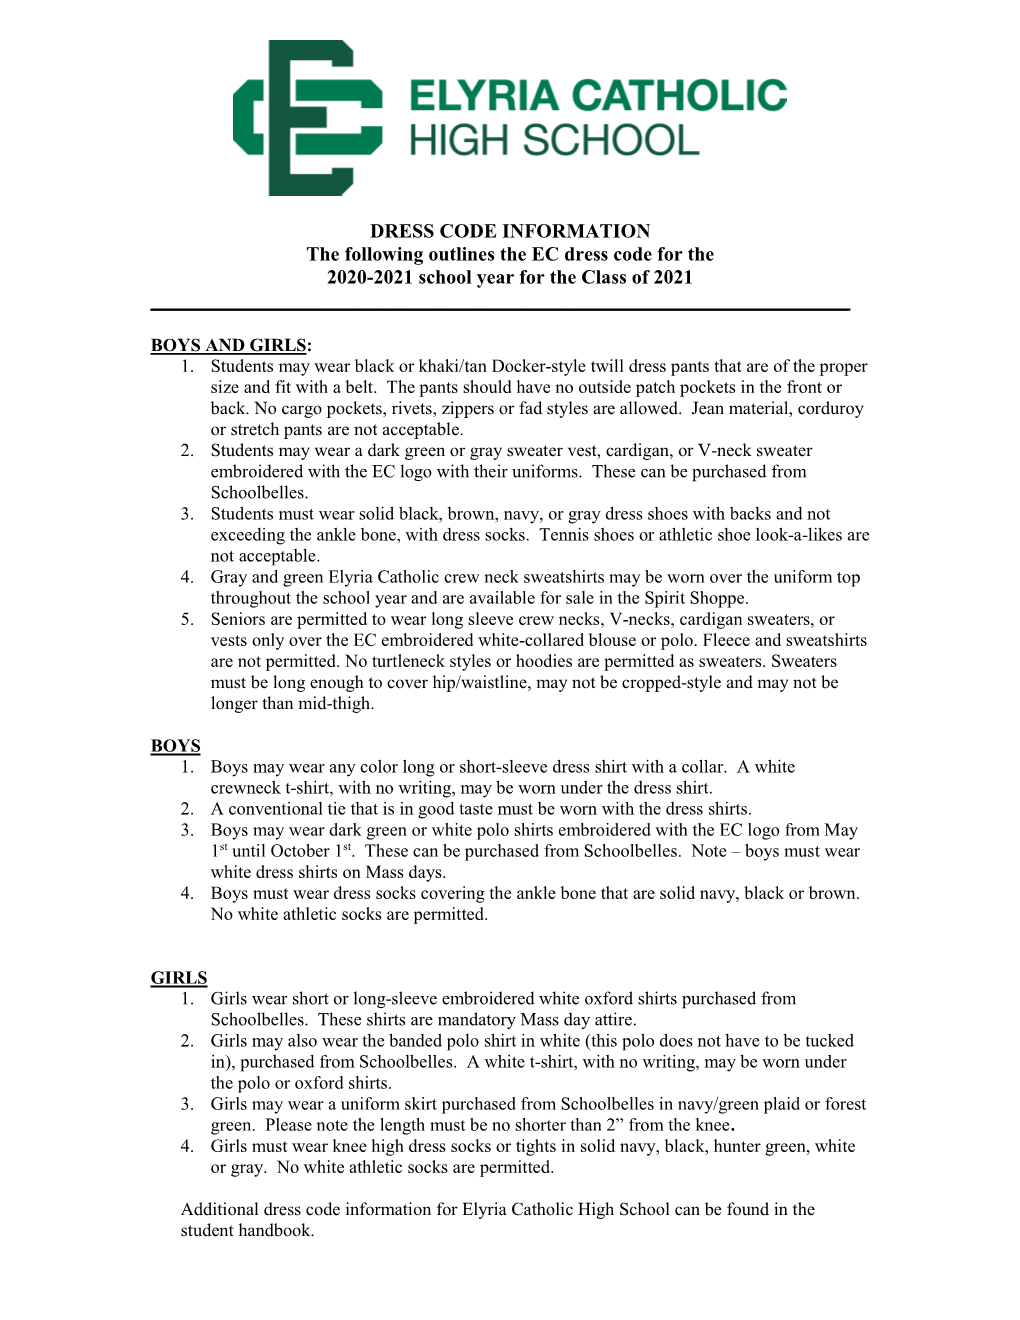 DRESS CODE INFORMATION the Following Outlines the EC Dress Code for the 2020-2021 School Year for the Class of 2021 ______